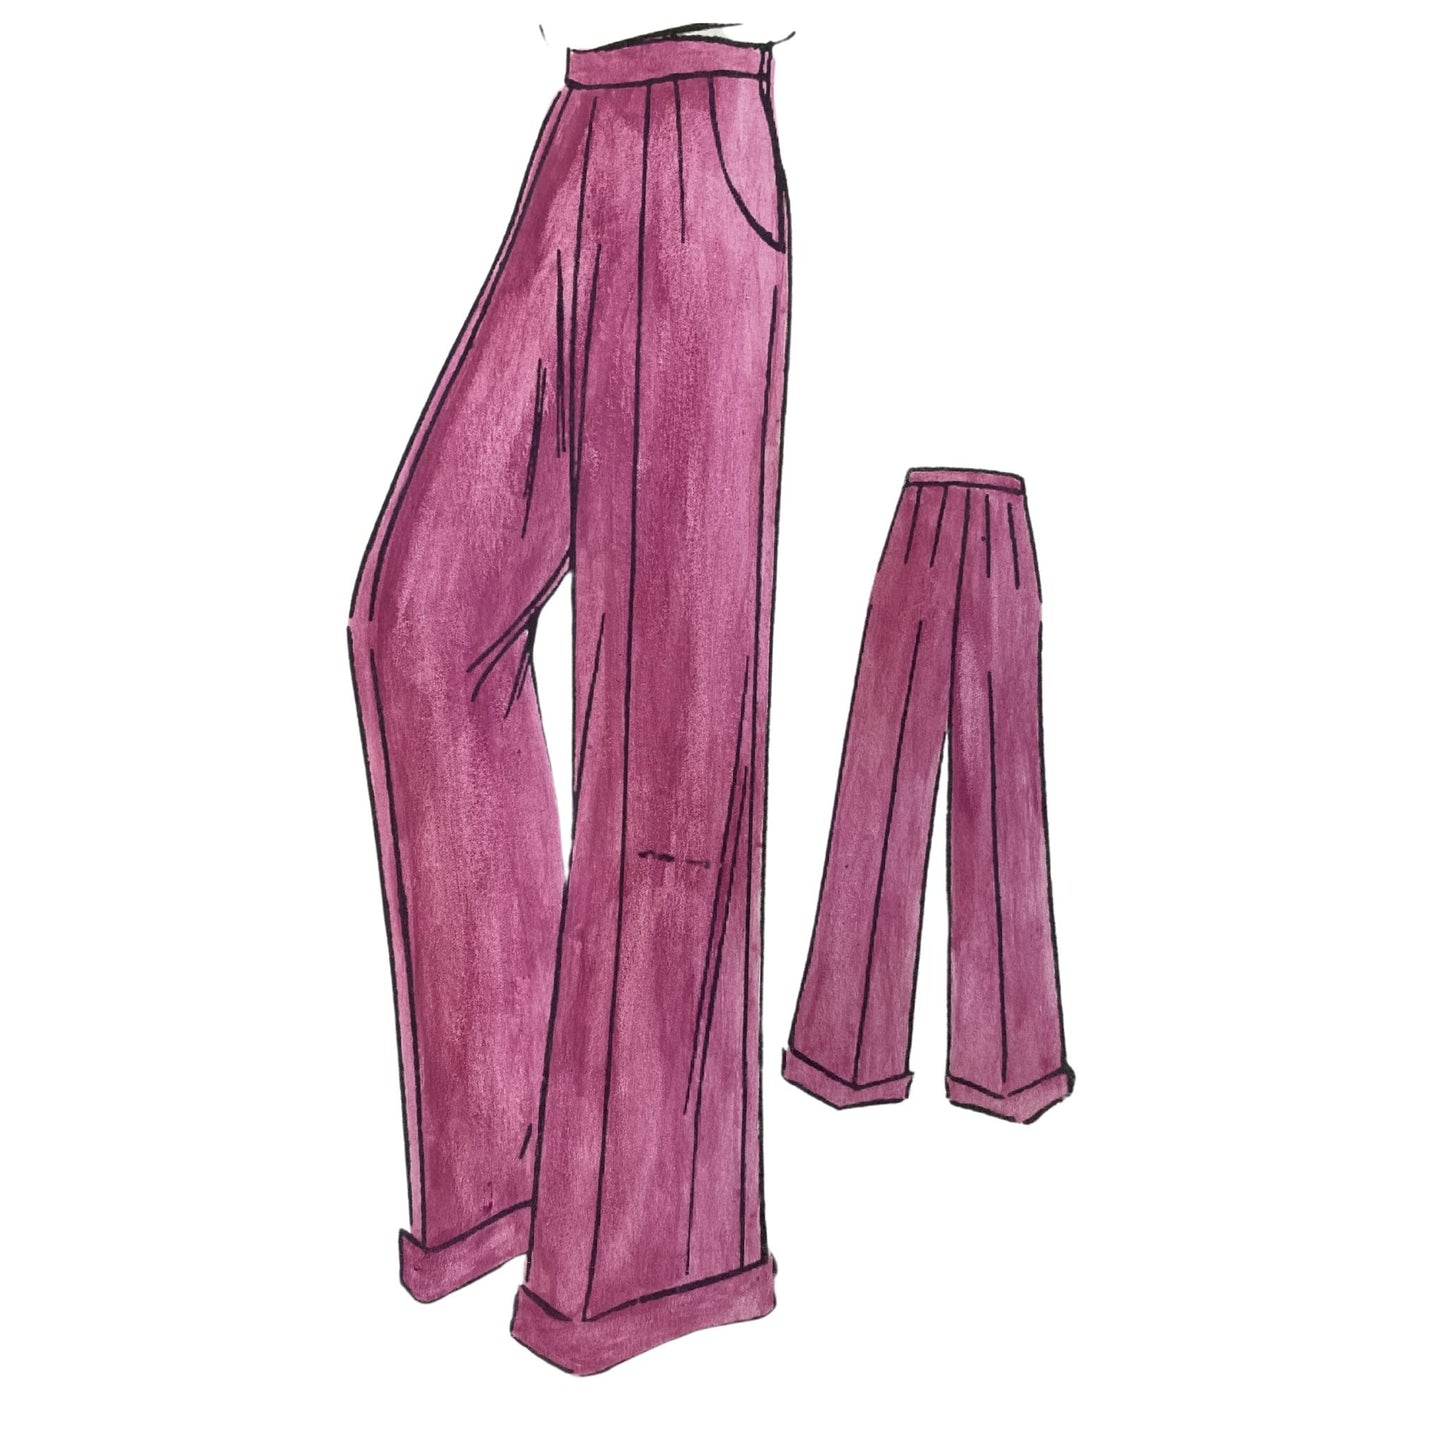 Hand drawn image of women's slacks with wide legs and turnups, front pockets and waistband